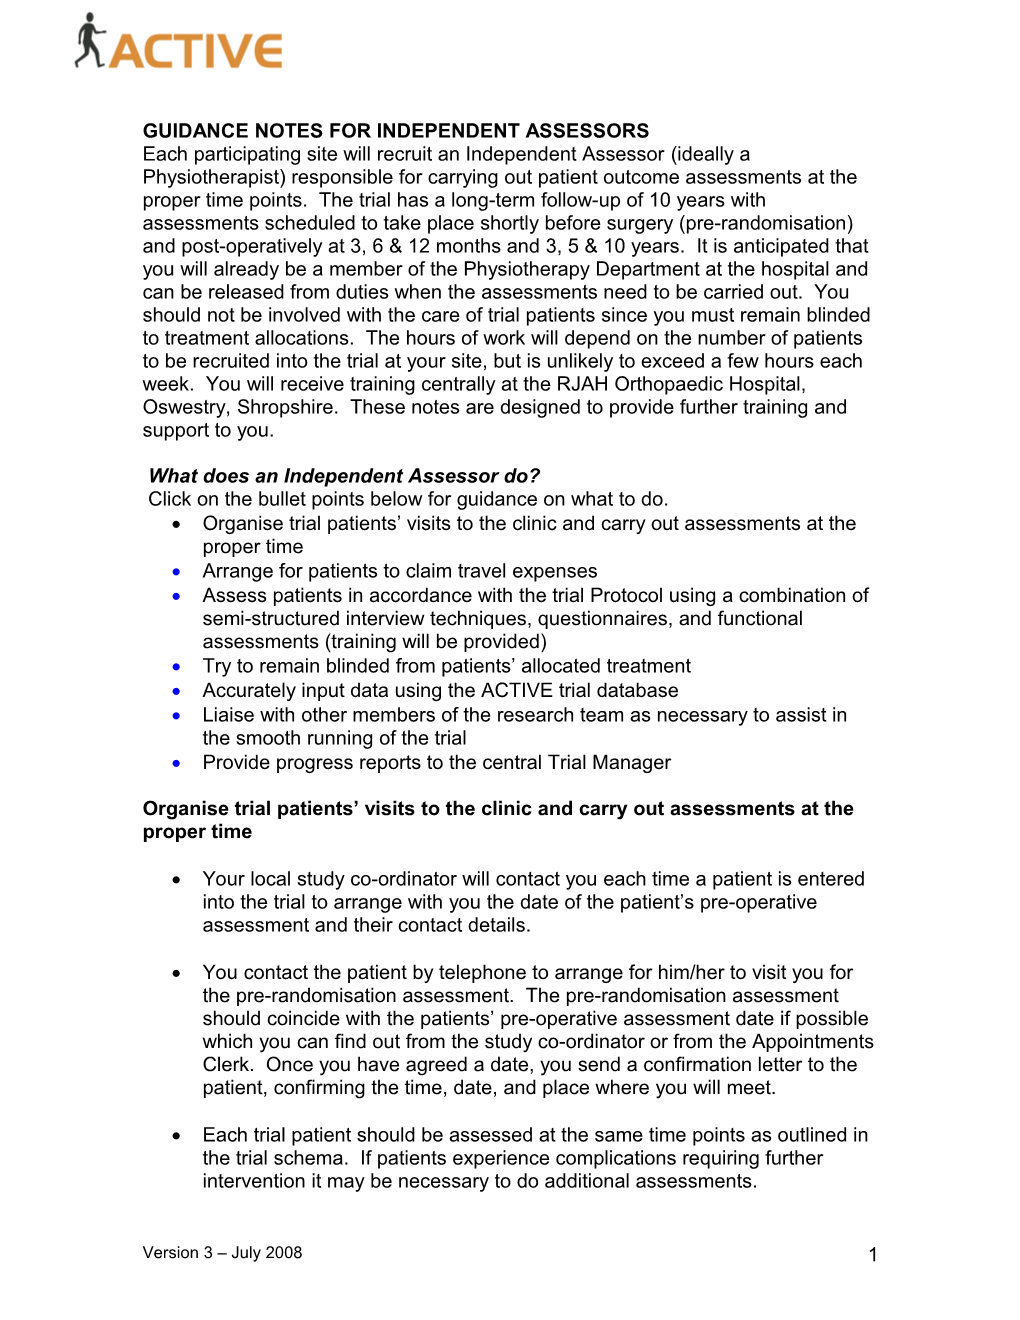 Guidance Notes for Independent Assessors